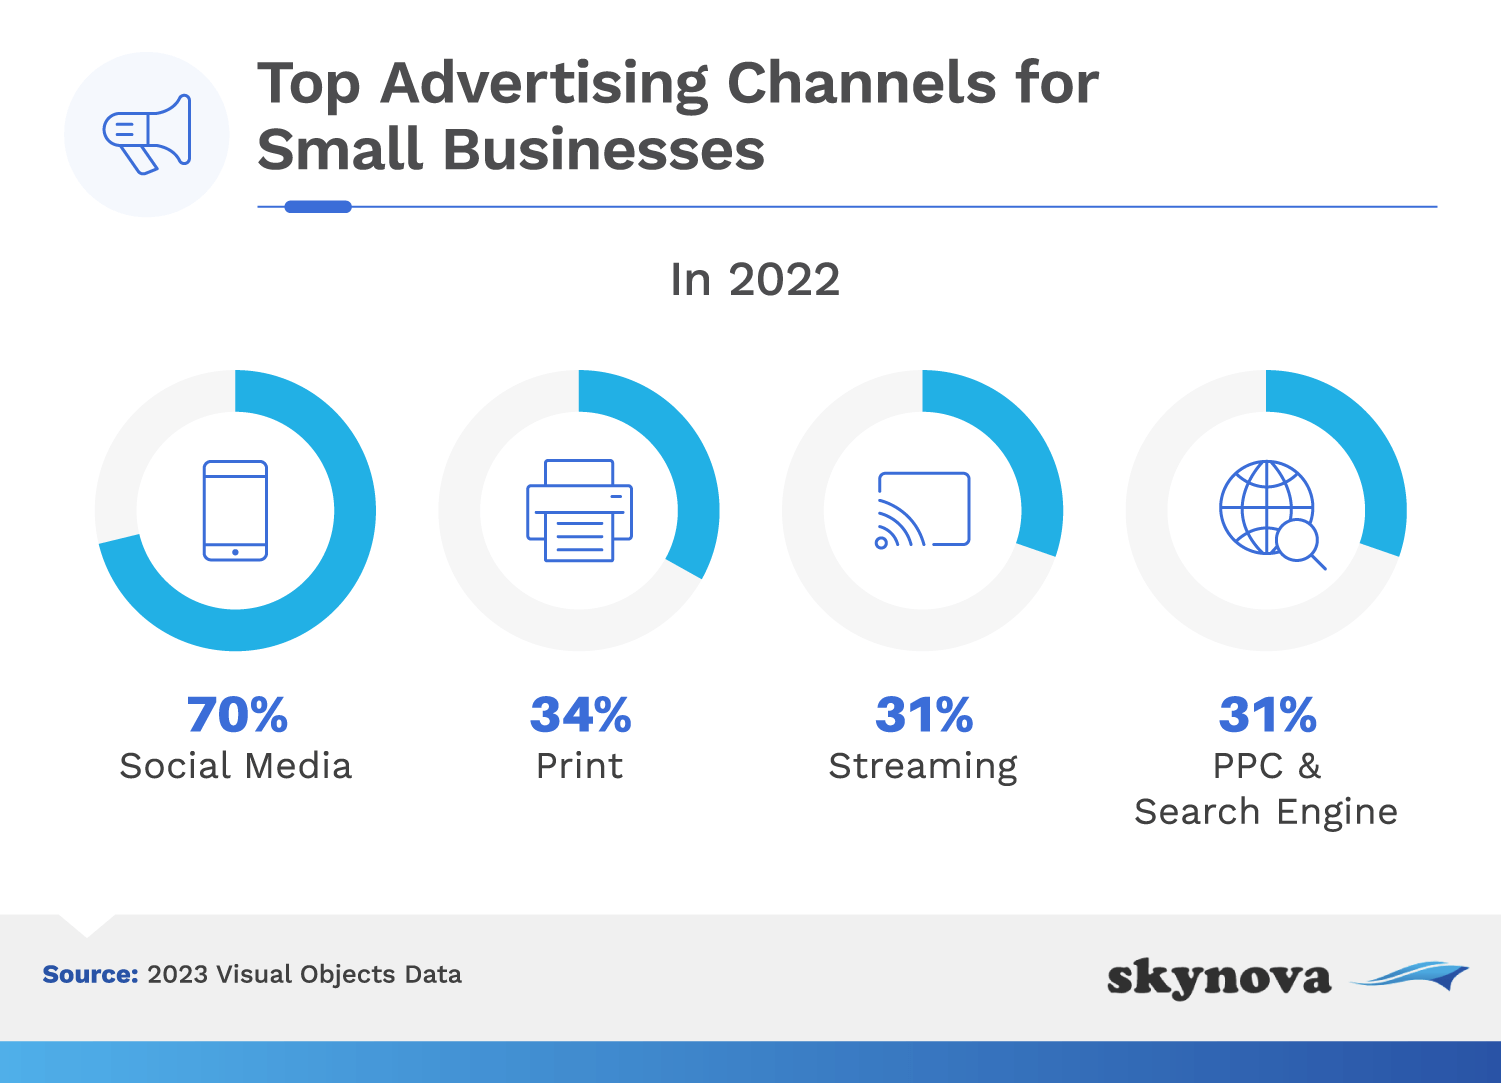 Top advertising channels for small businesses